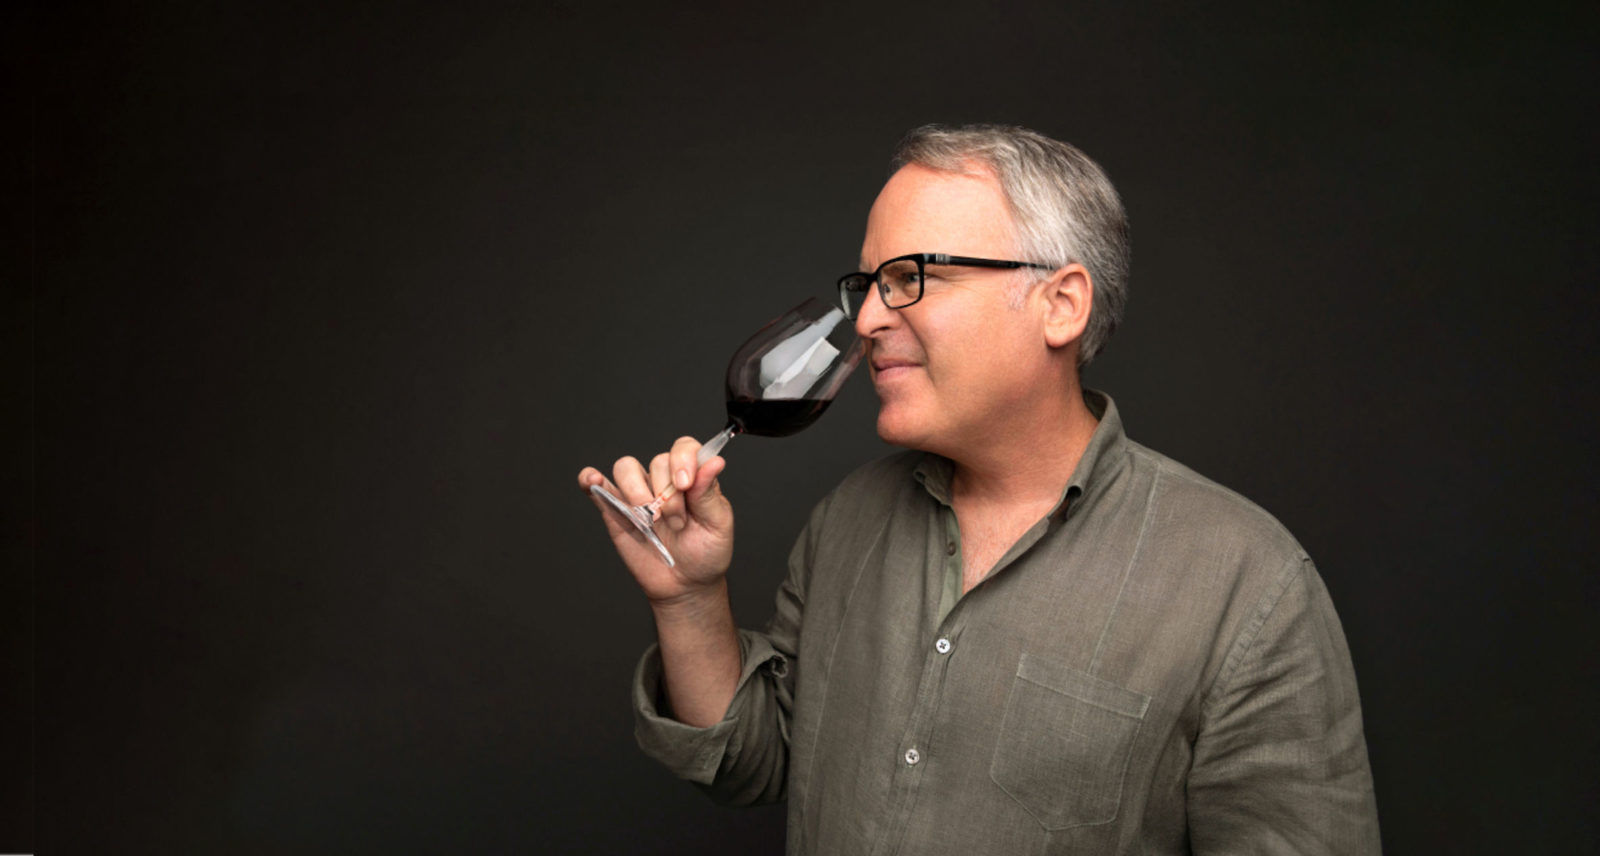 Critic and restaurant owner James Suckling on a lifetime in the wine industry